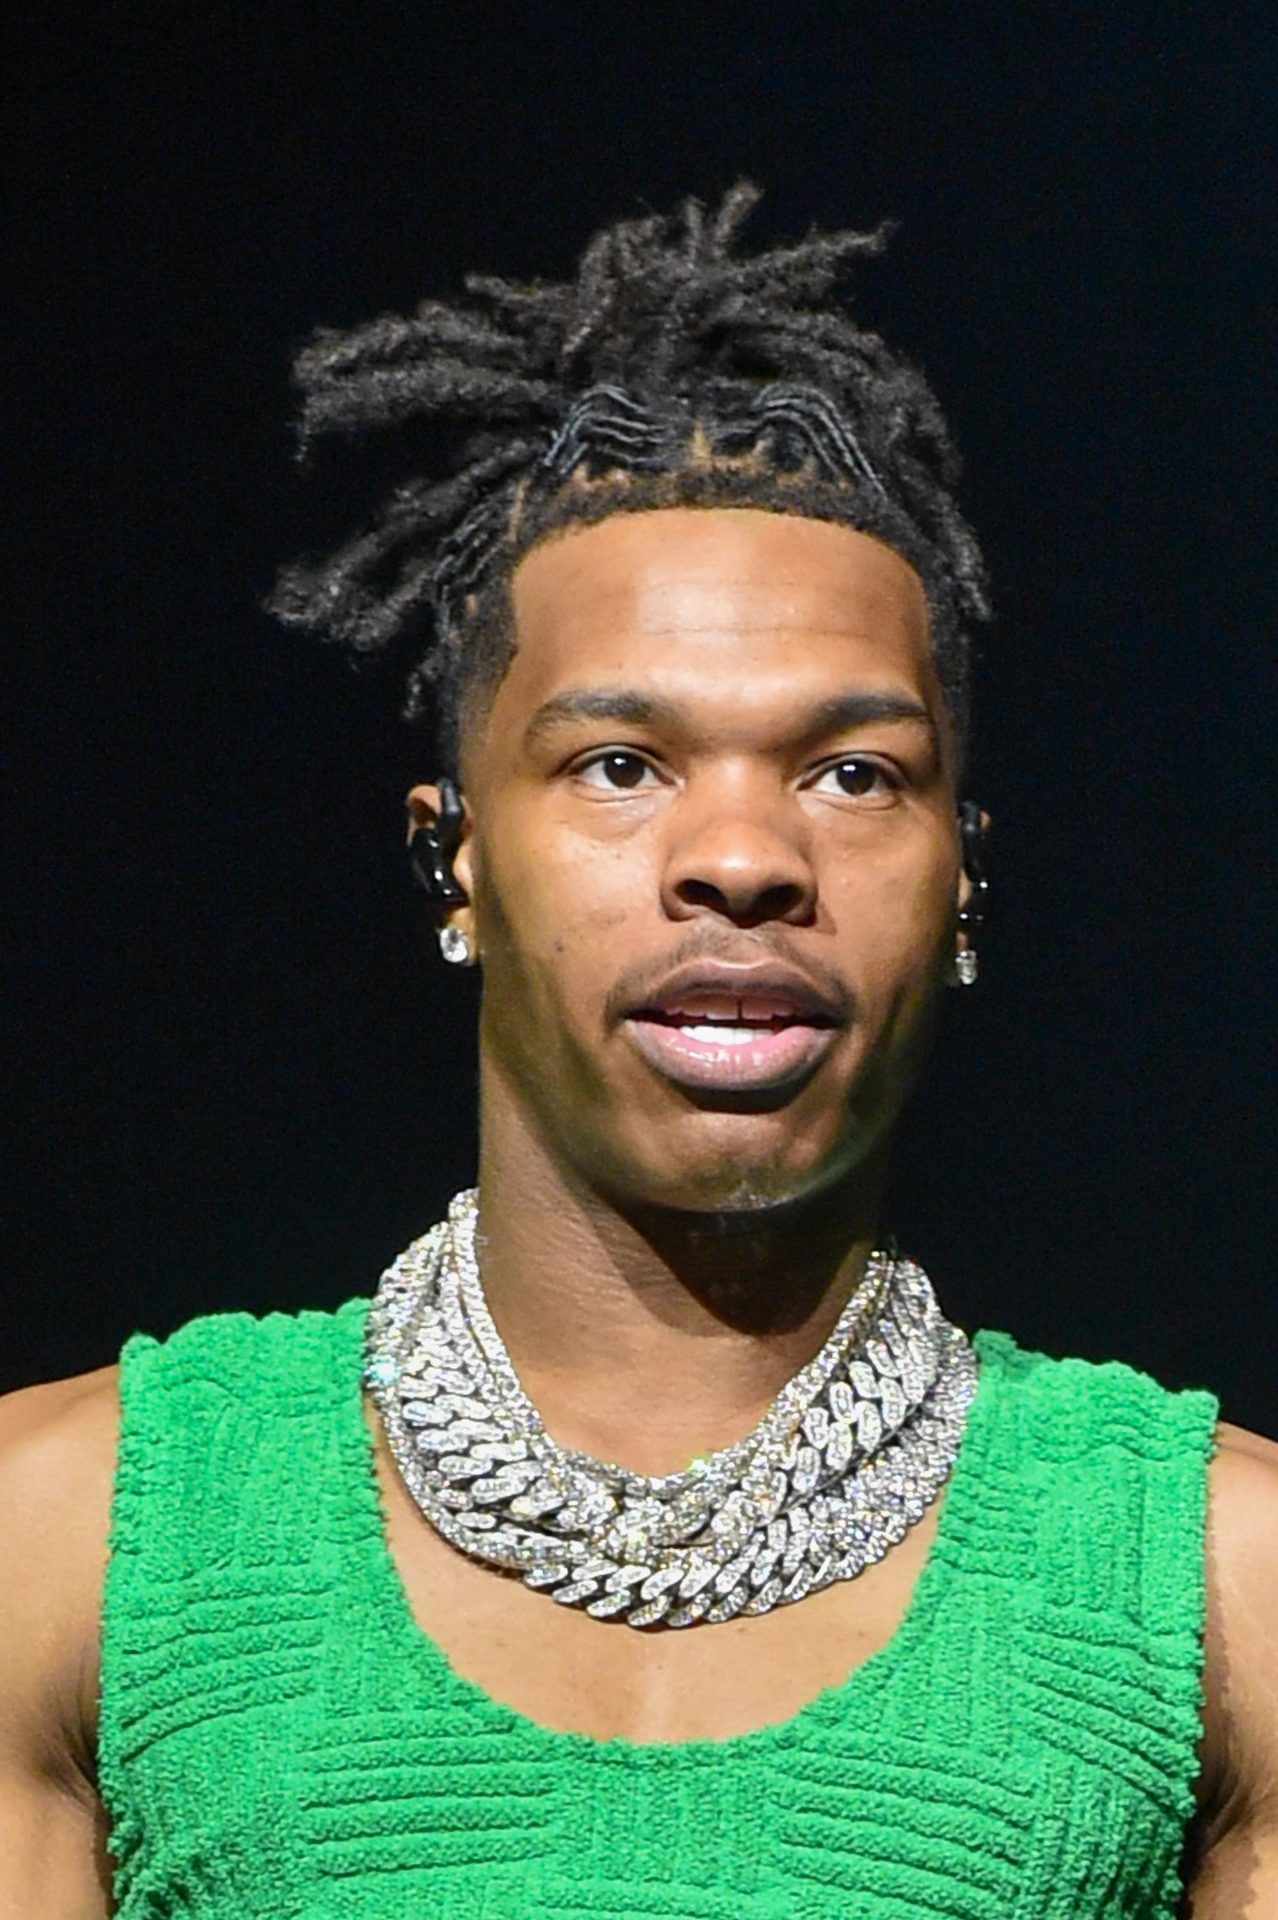 Lil Baby Responds To A Fan Warning Him About Possible RICO Indictment In Atlanta—“Only God Can Judge Me”